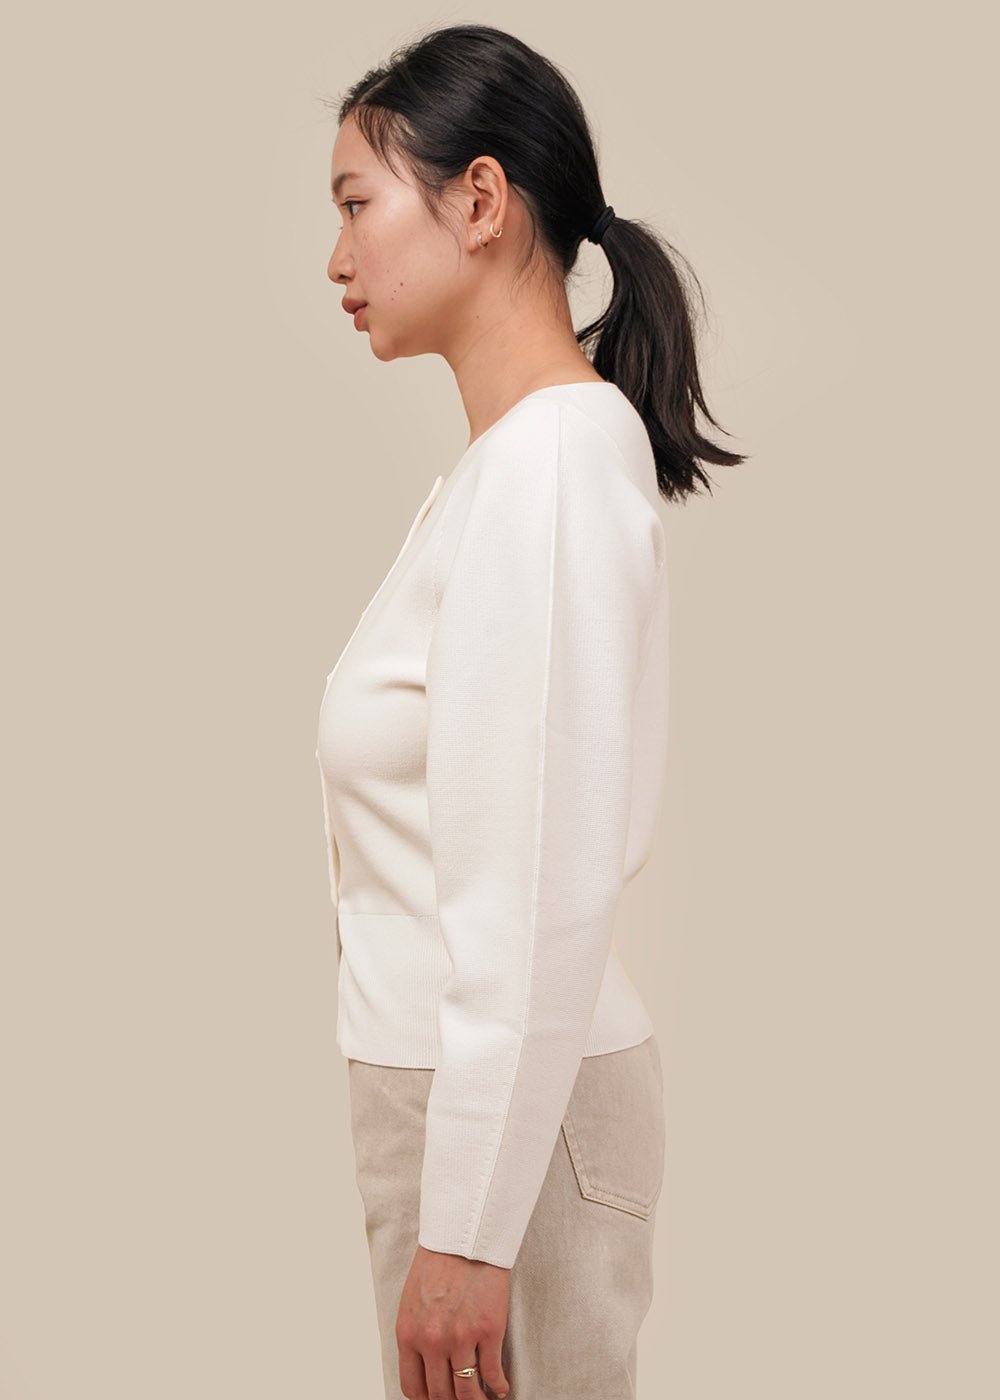 Whole Garment Rounded Cardigan in Ivory by AMOMENTO – New Classics